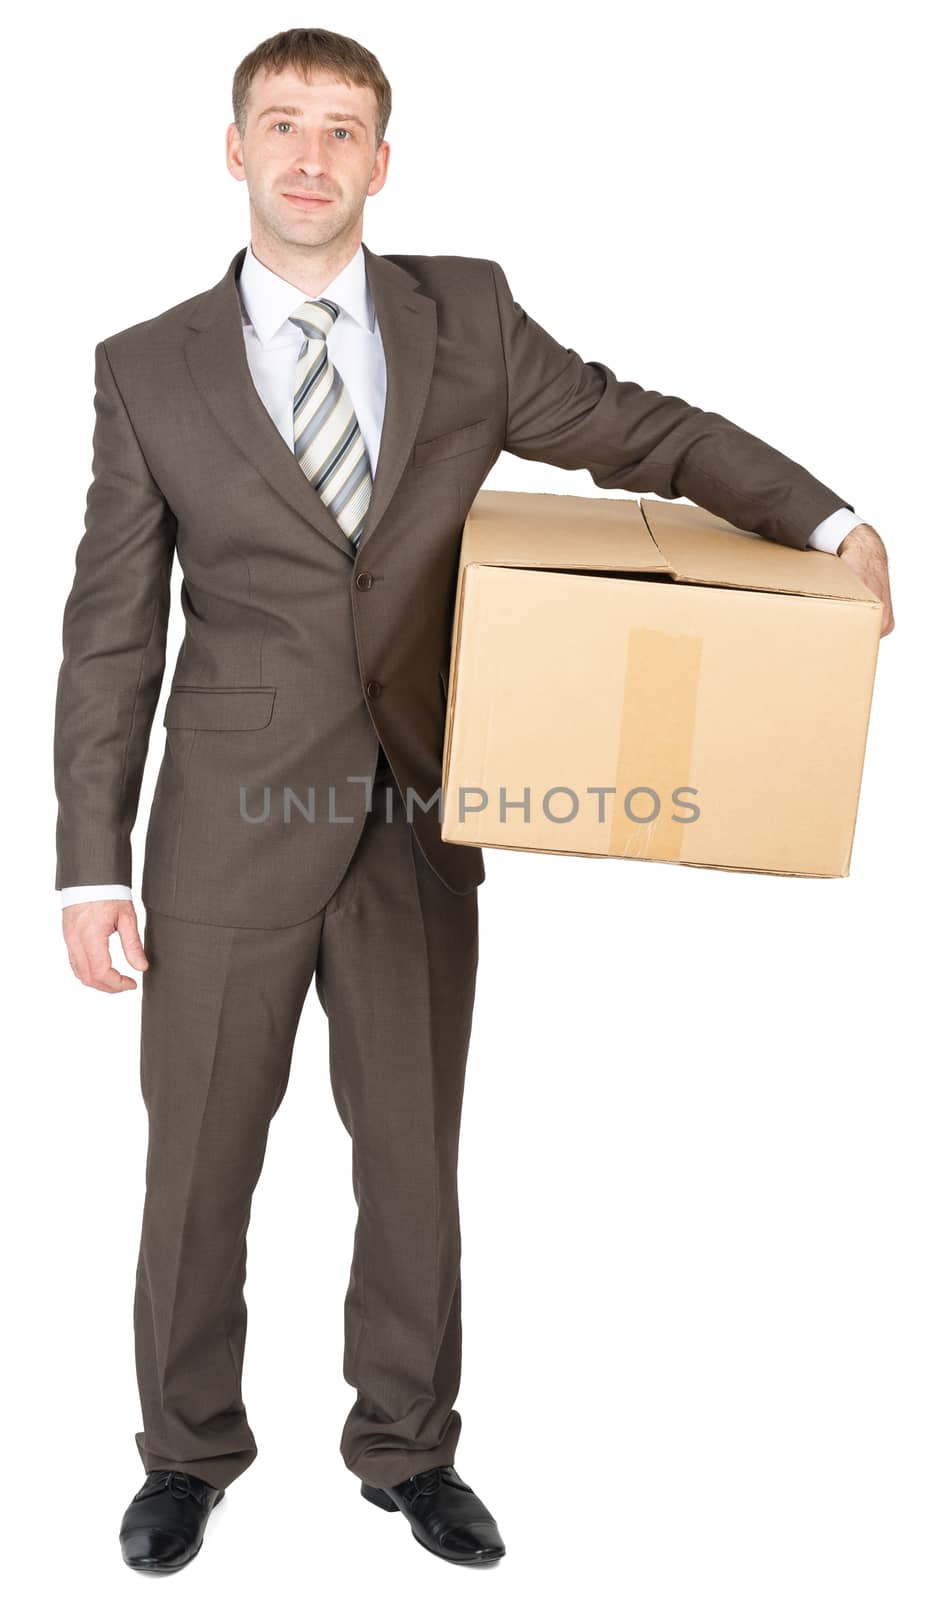 Deliveryman keeps parcel, isolated on white background